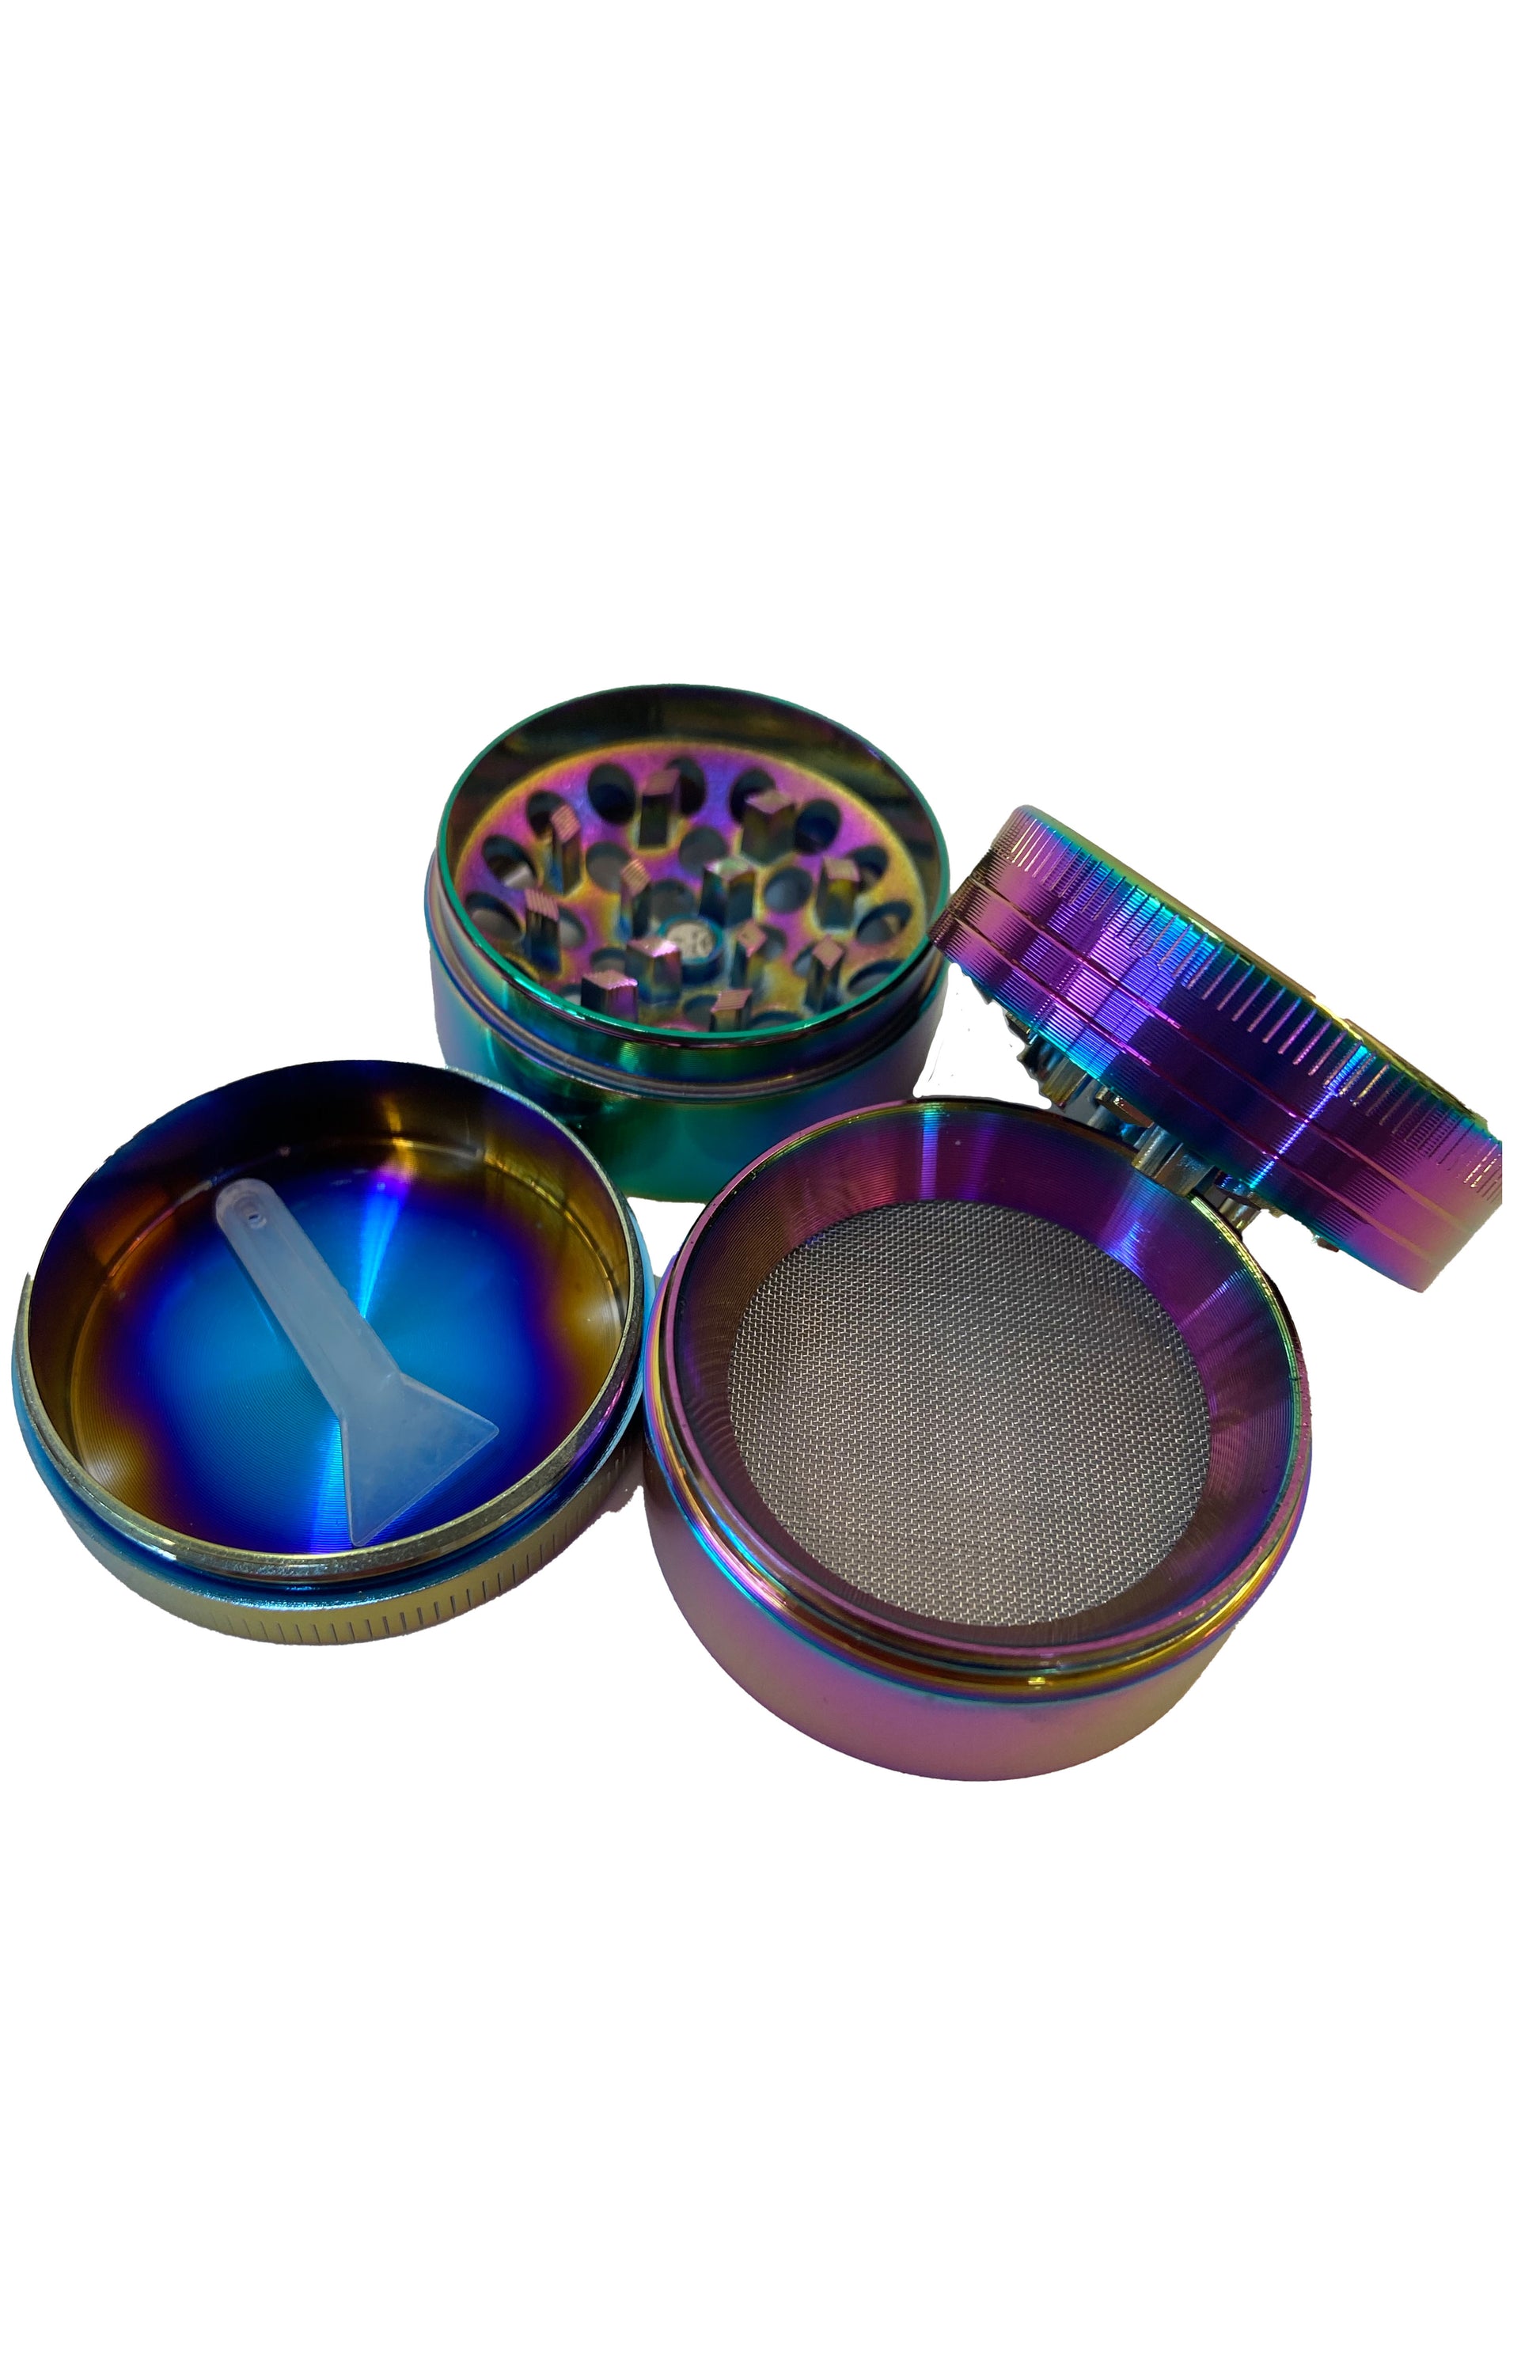 Small Purple Grinders With Design